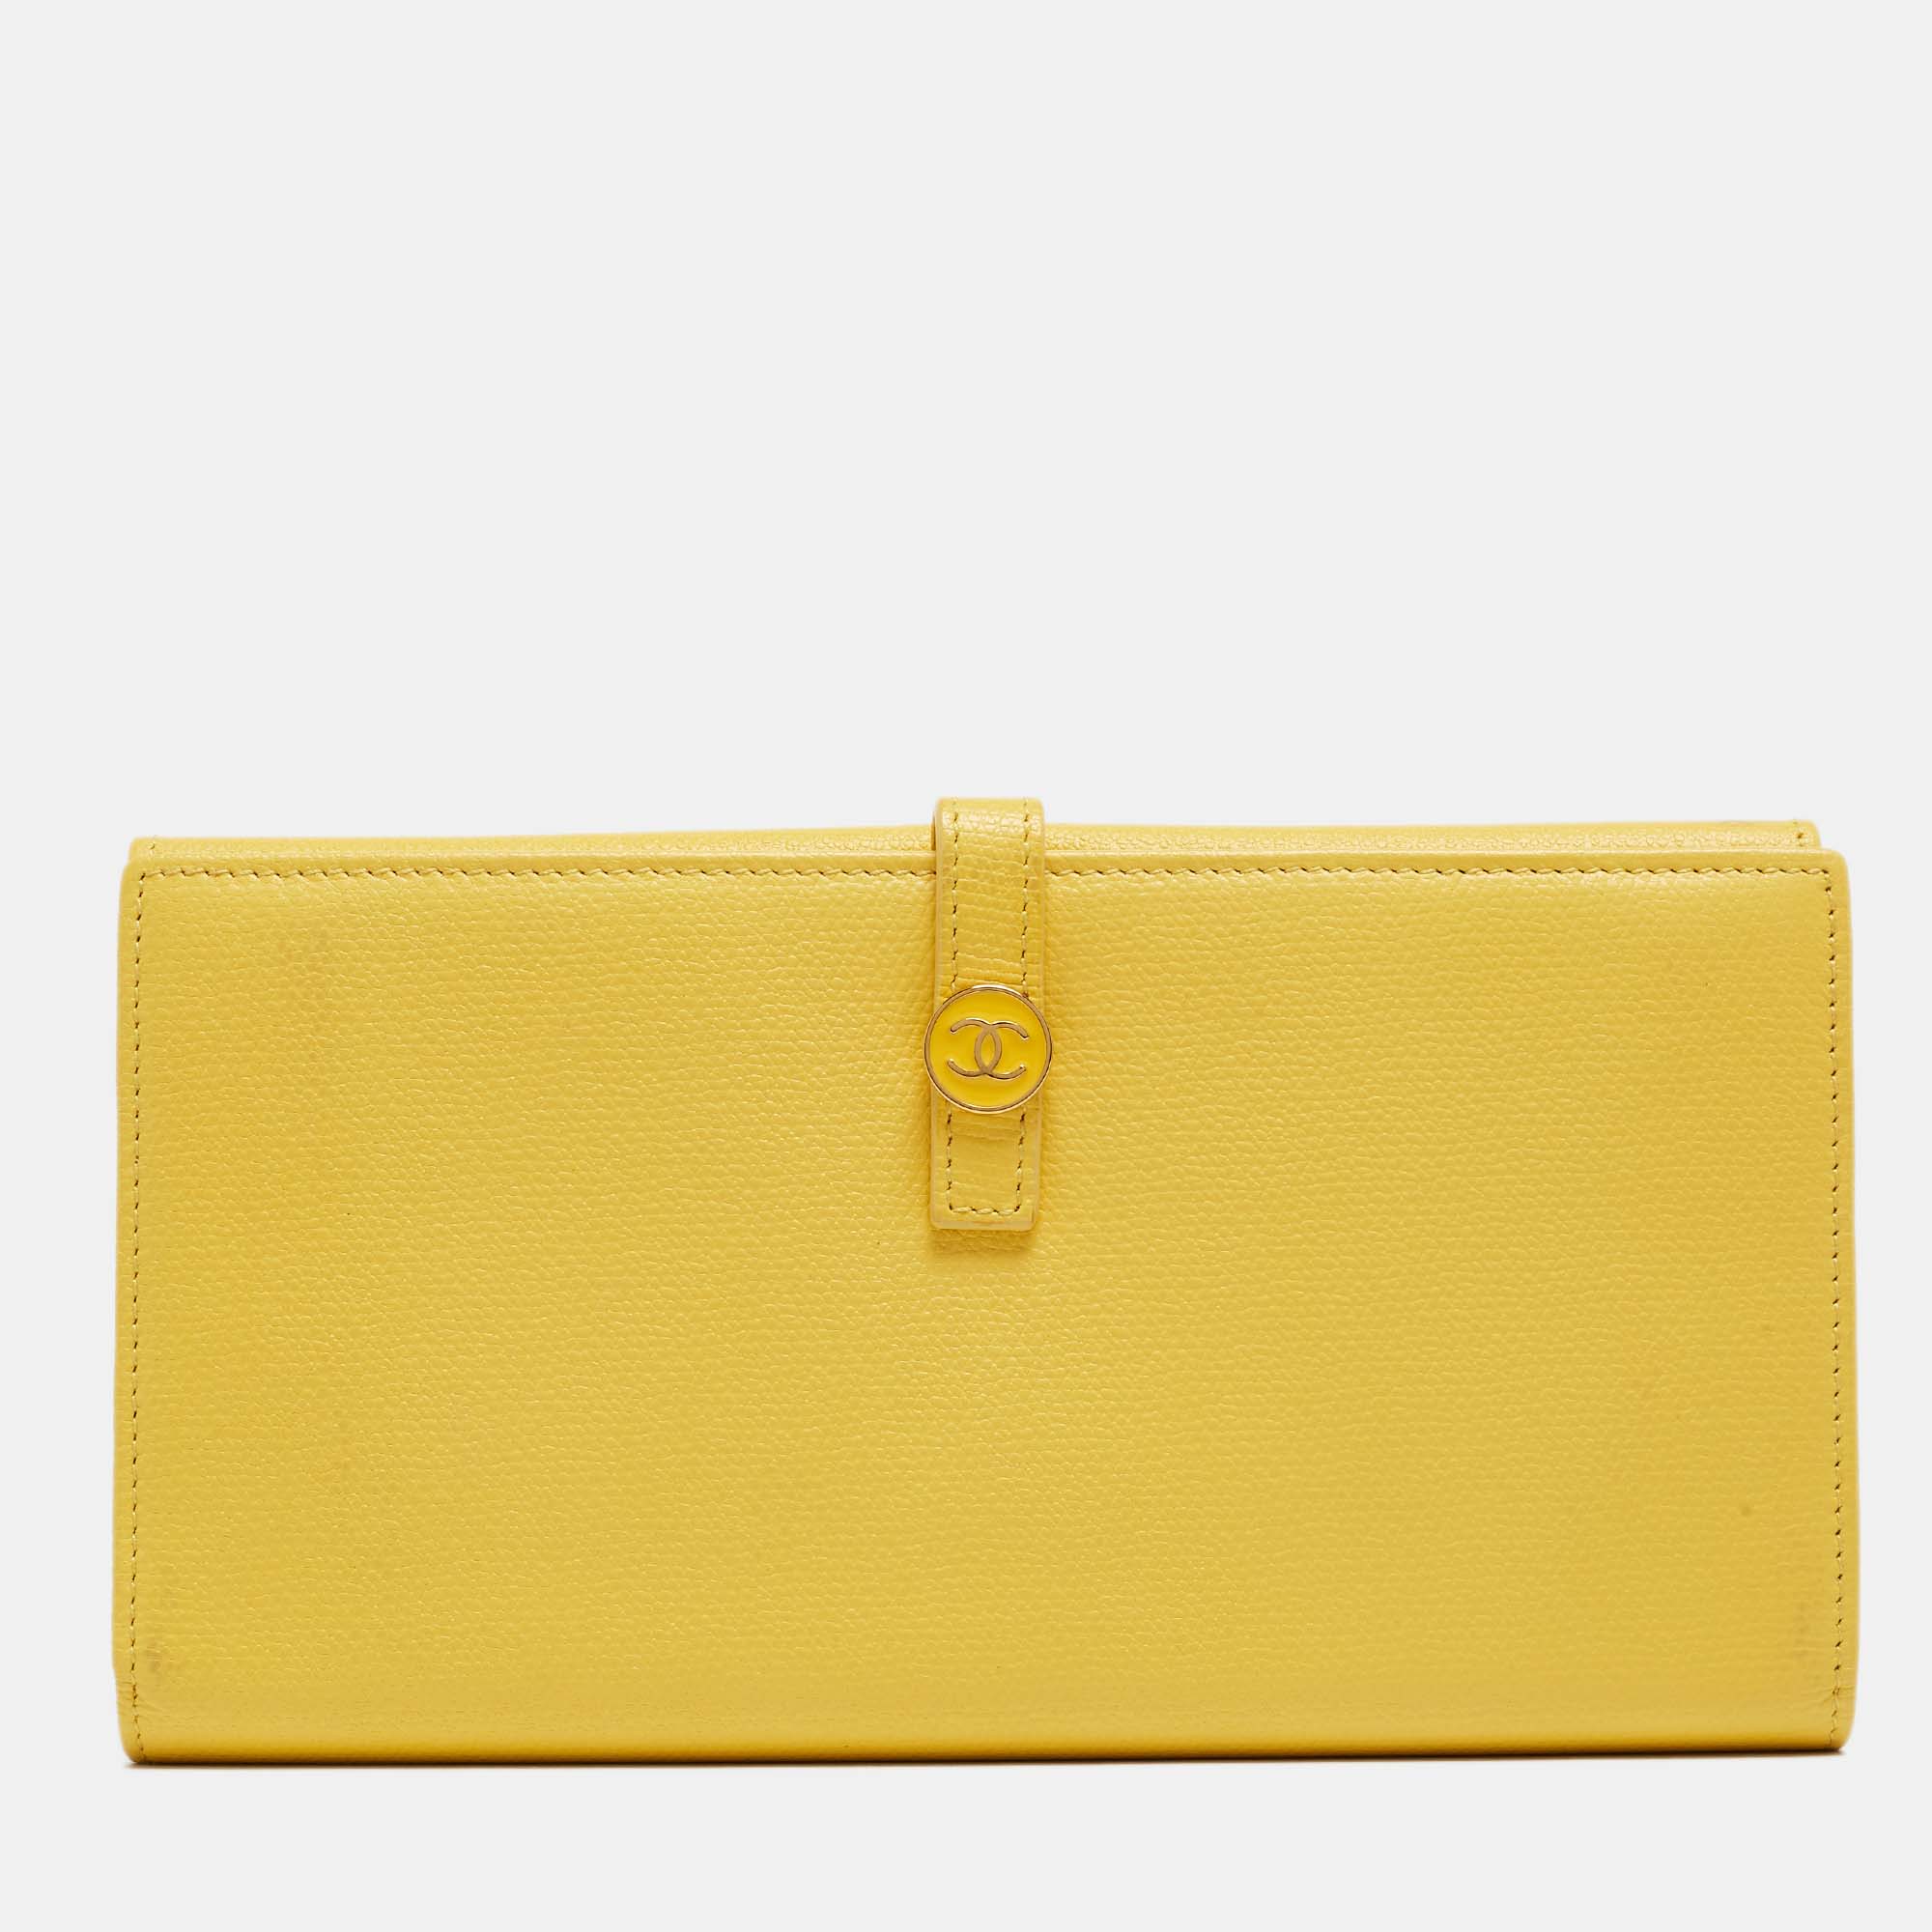 Chanel yellow leather cc flap french continental wallet